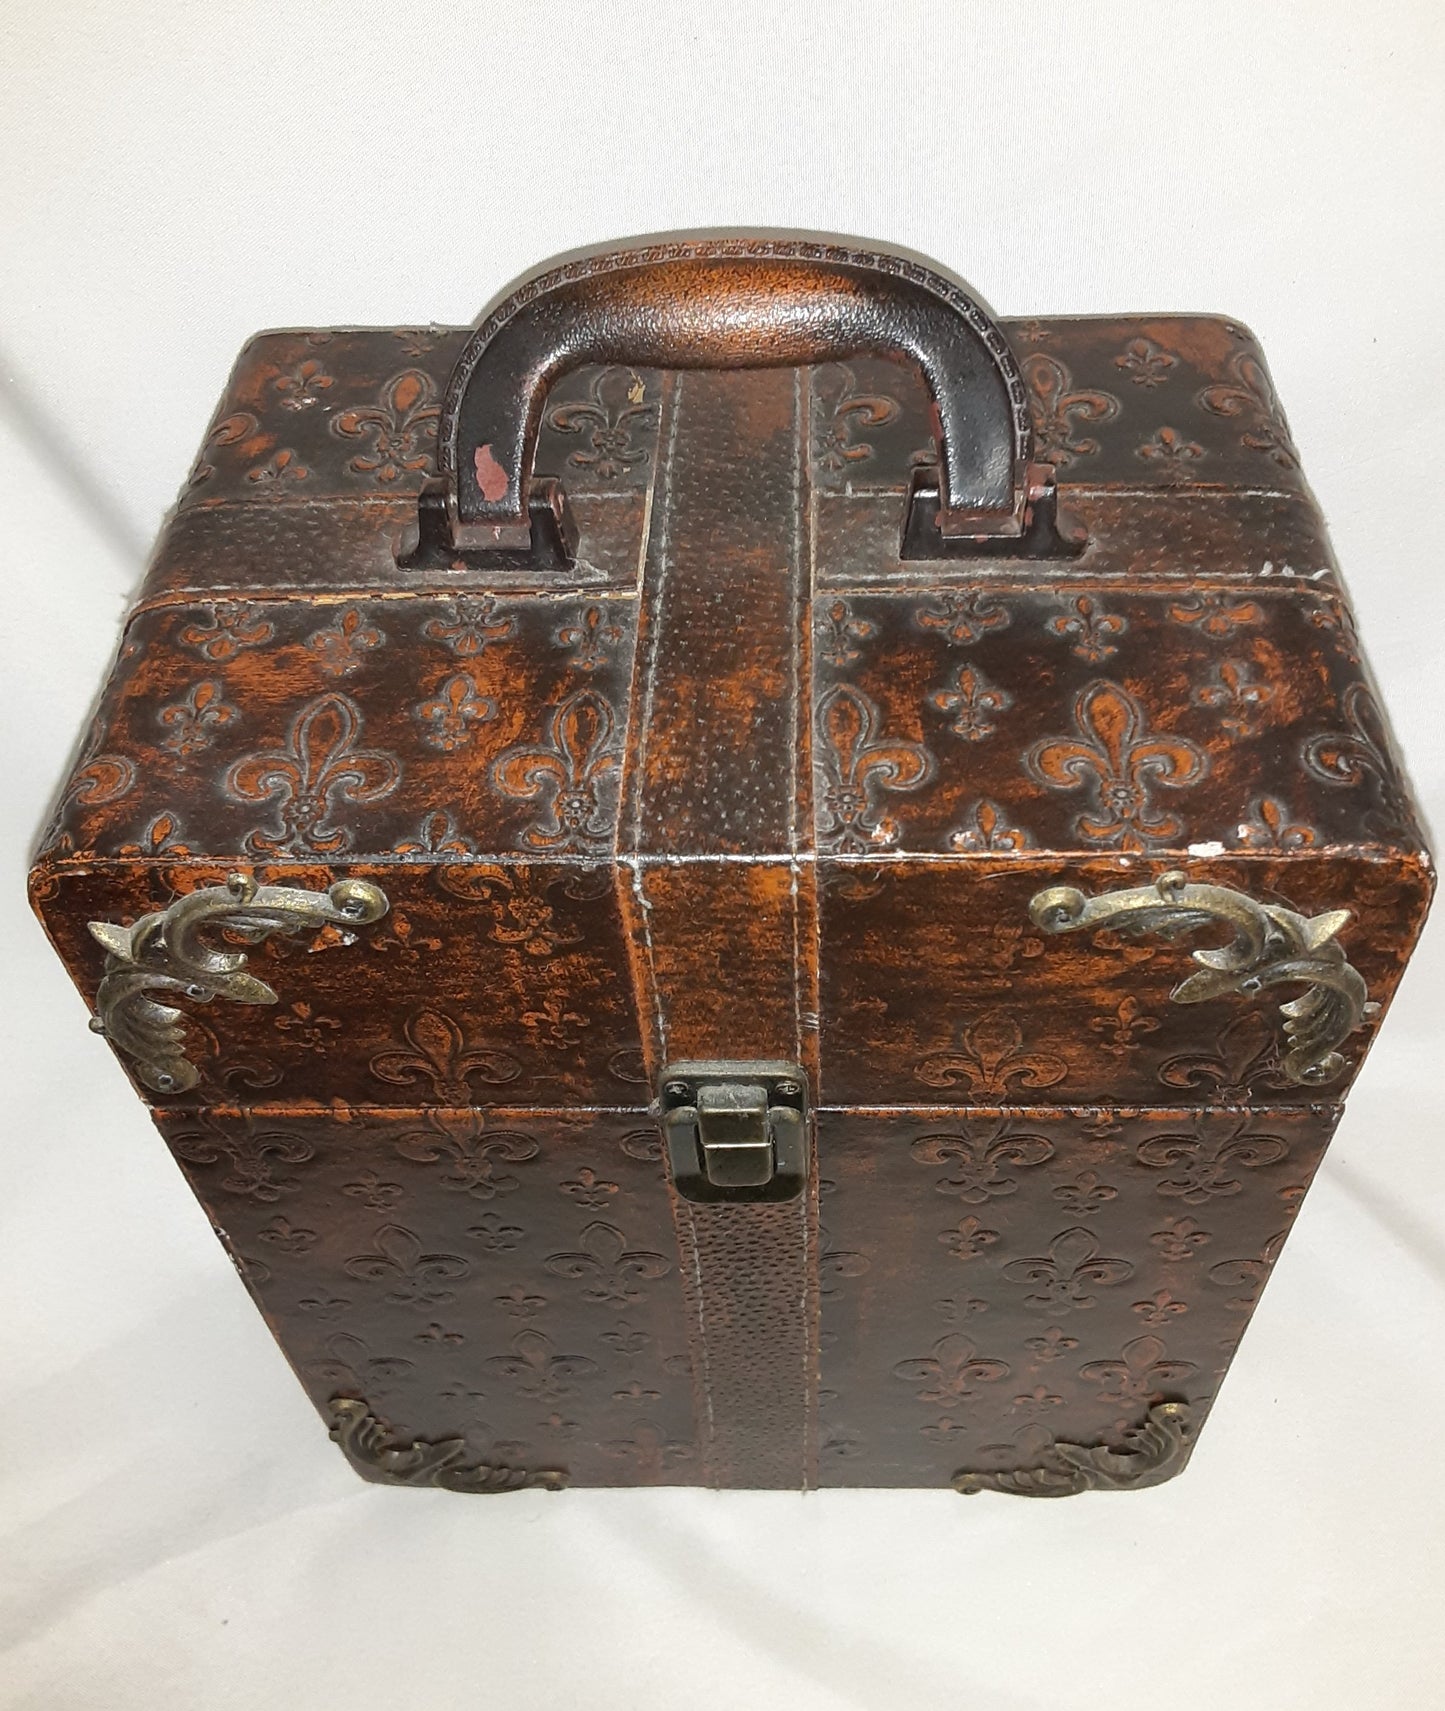 Box - Wood and Faux Leather Medium Treasure Chest